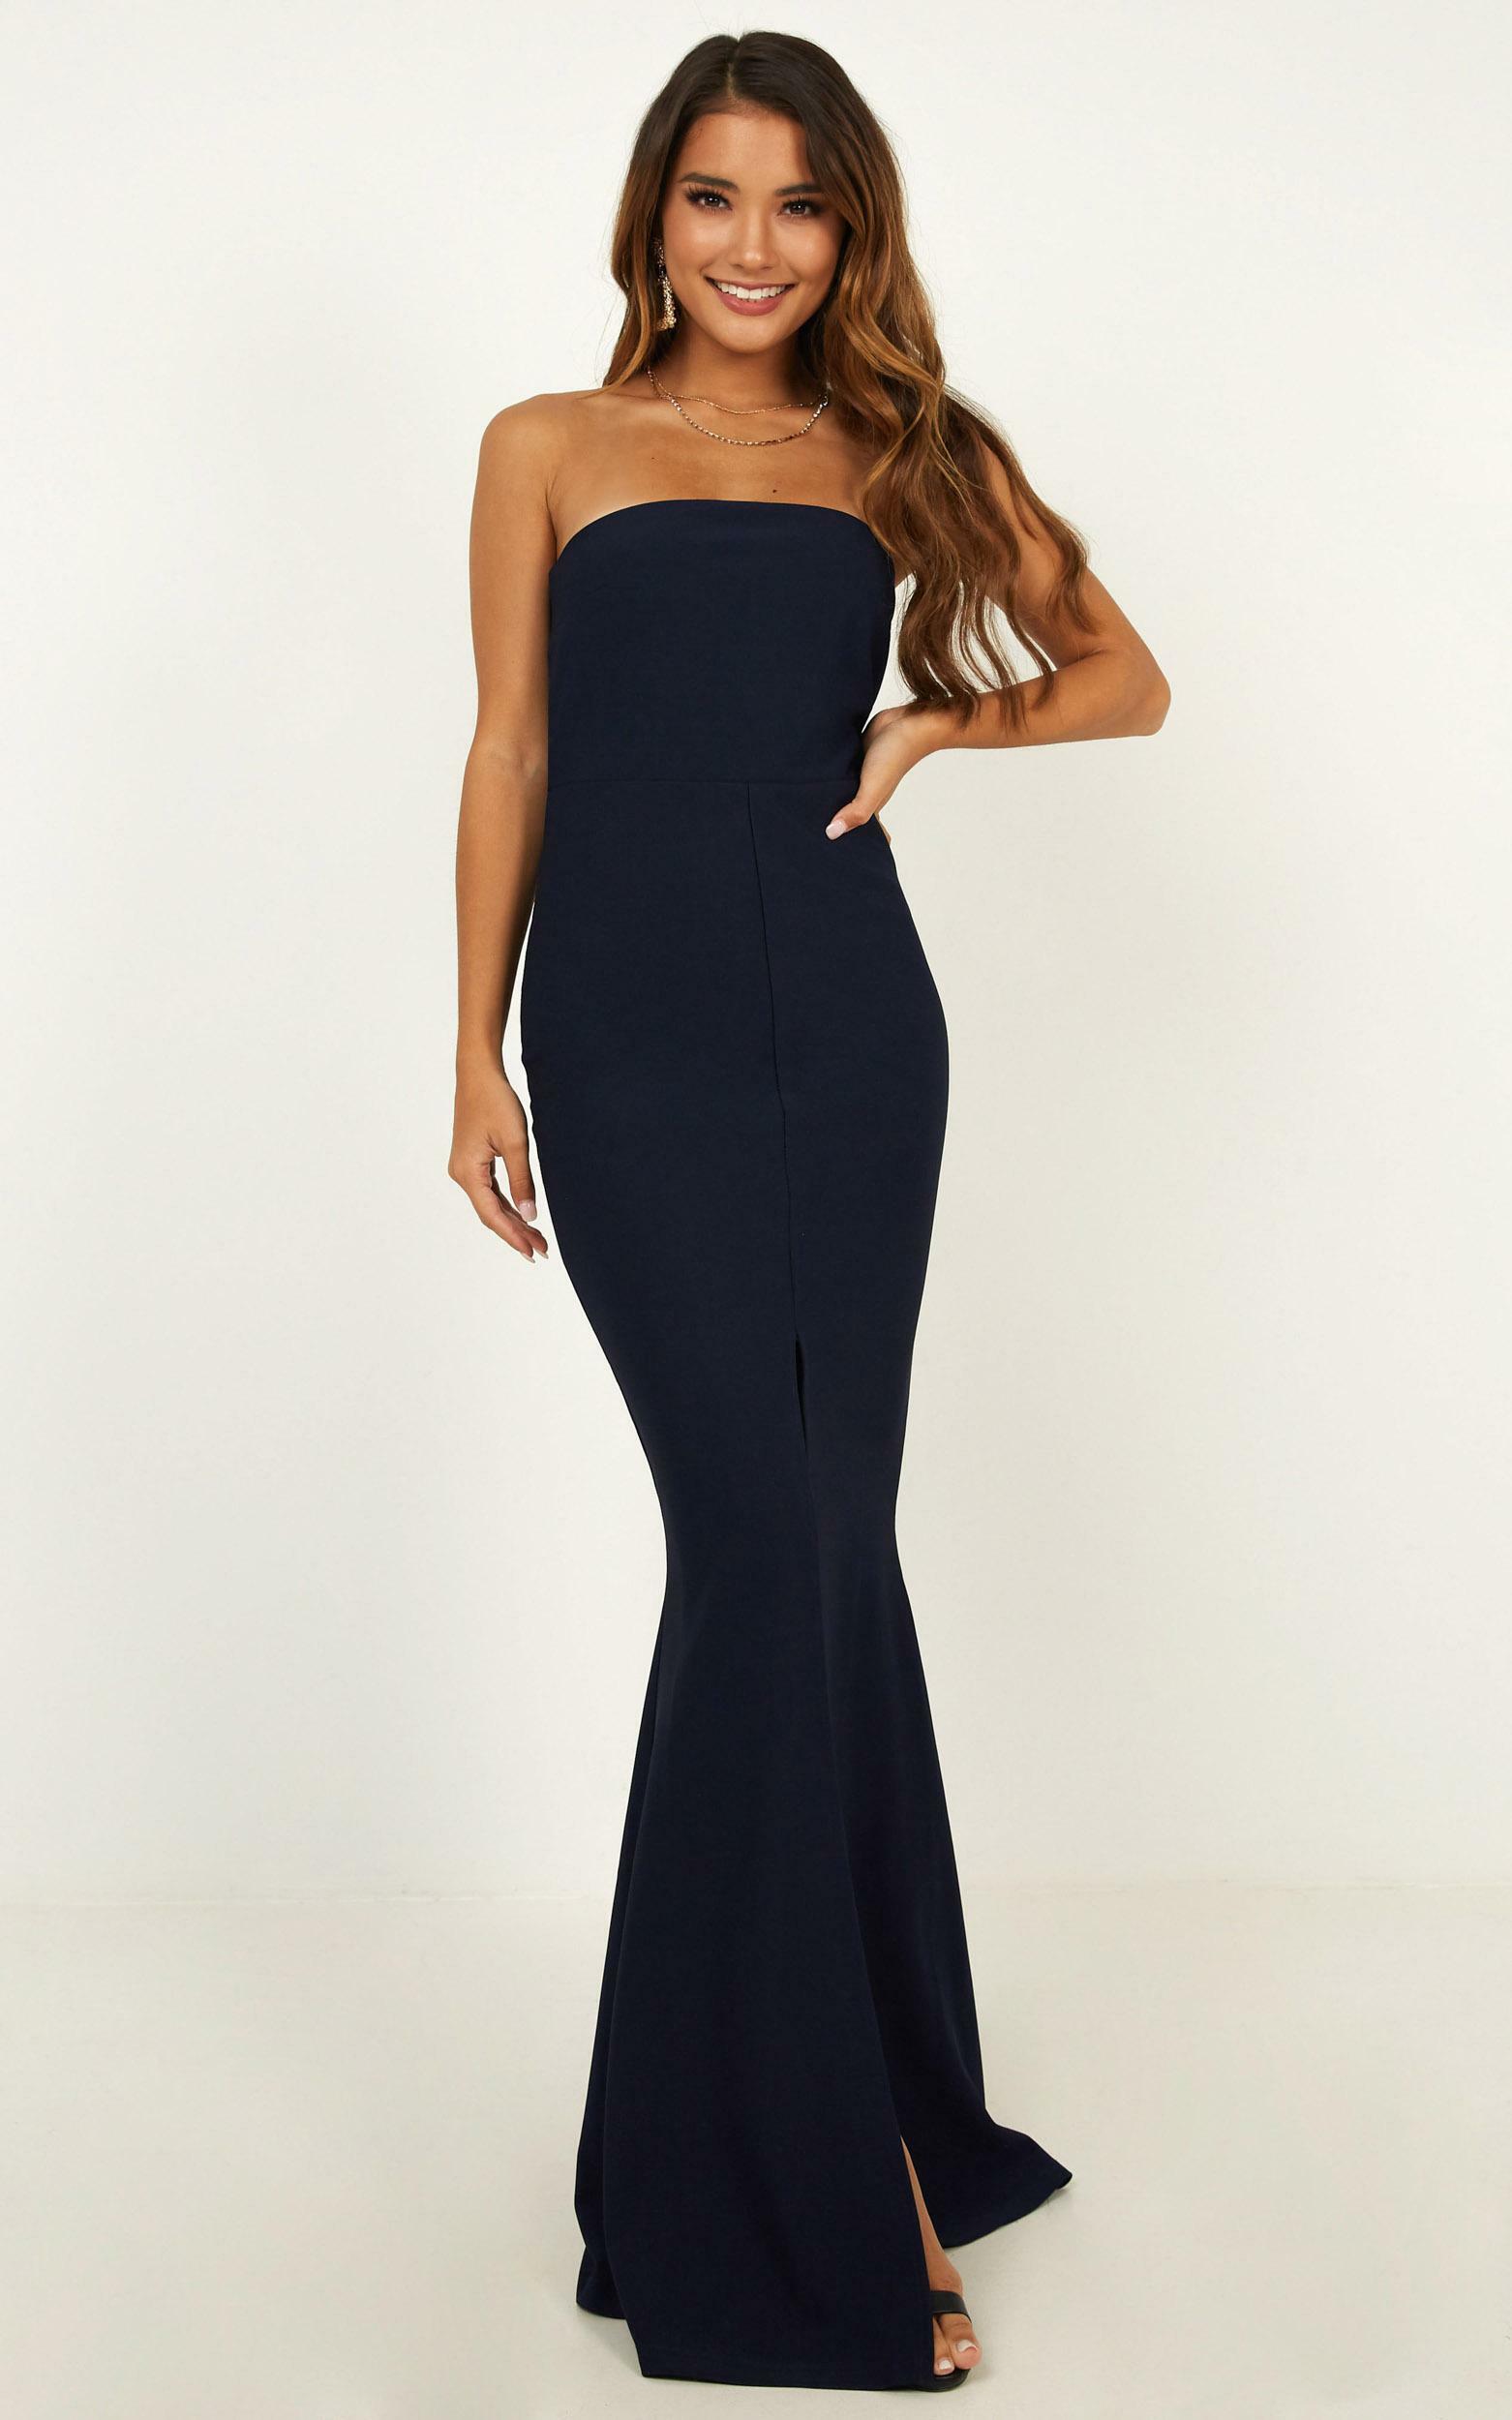 One More Kiss Maxi Dress in Navy - 20, NVY1, hi-res image number null